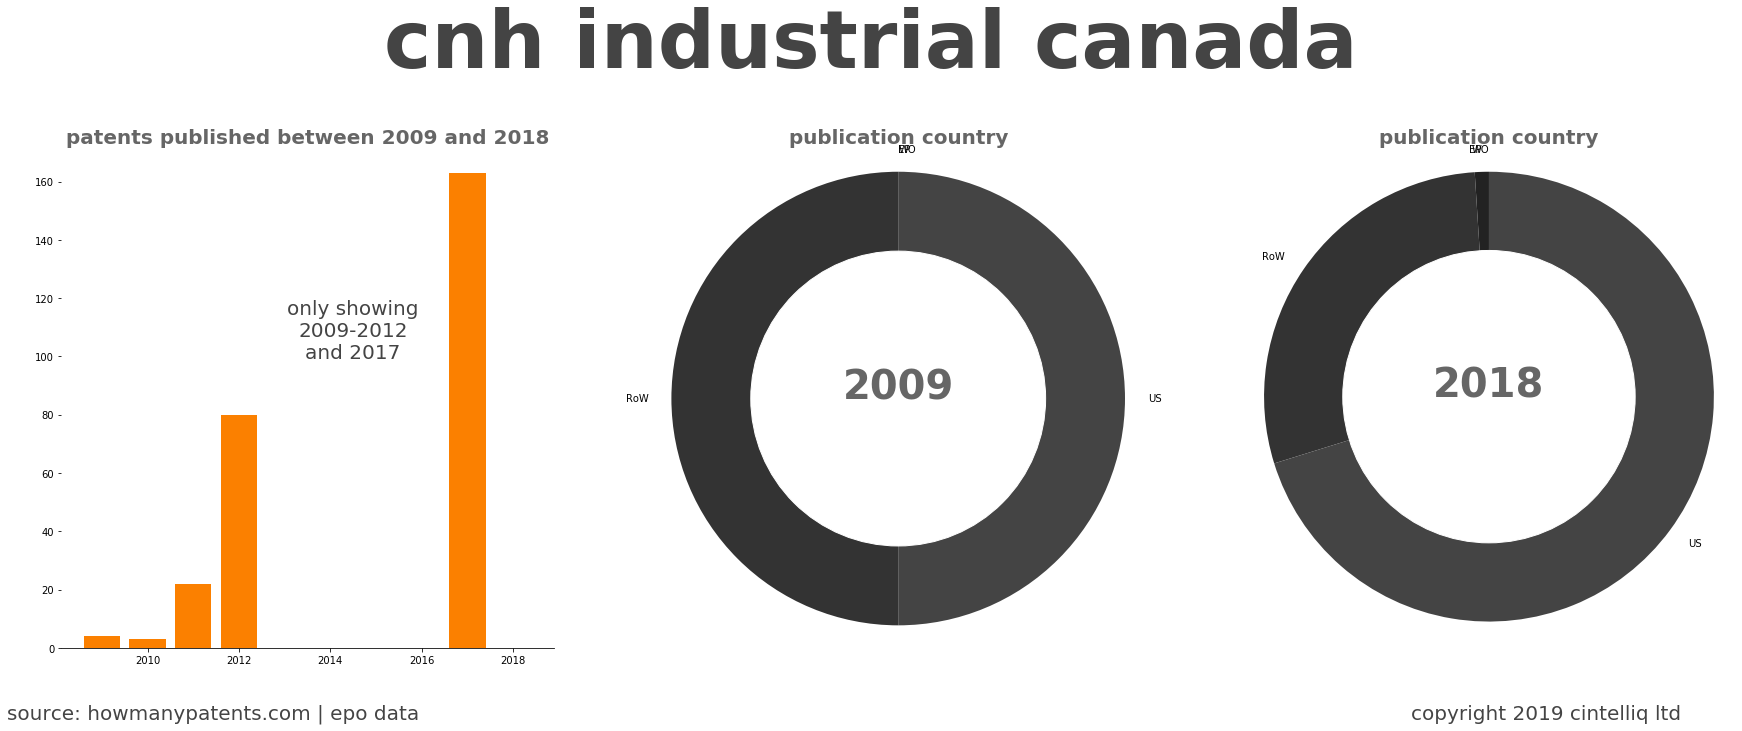 summary of patents for Cnh Industrial Canada